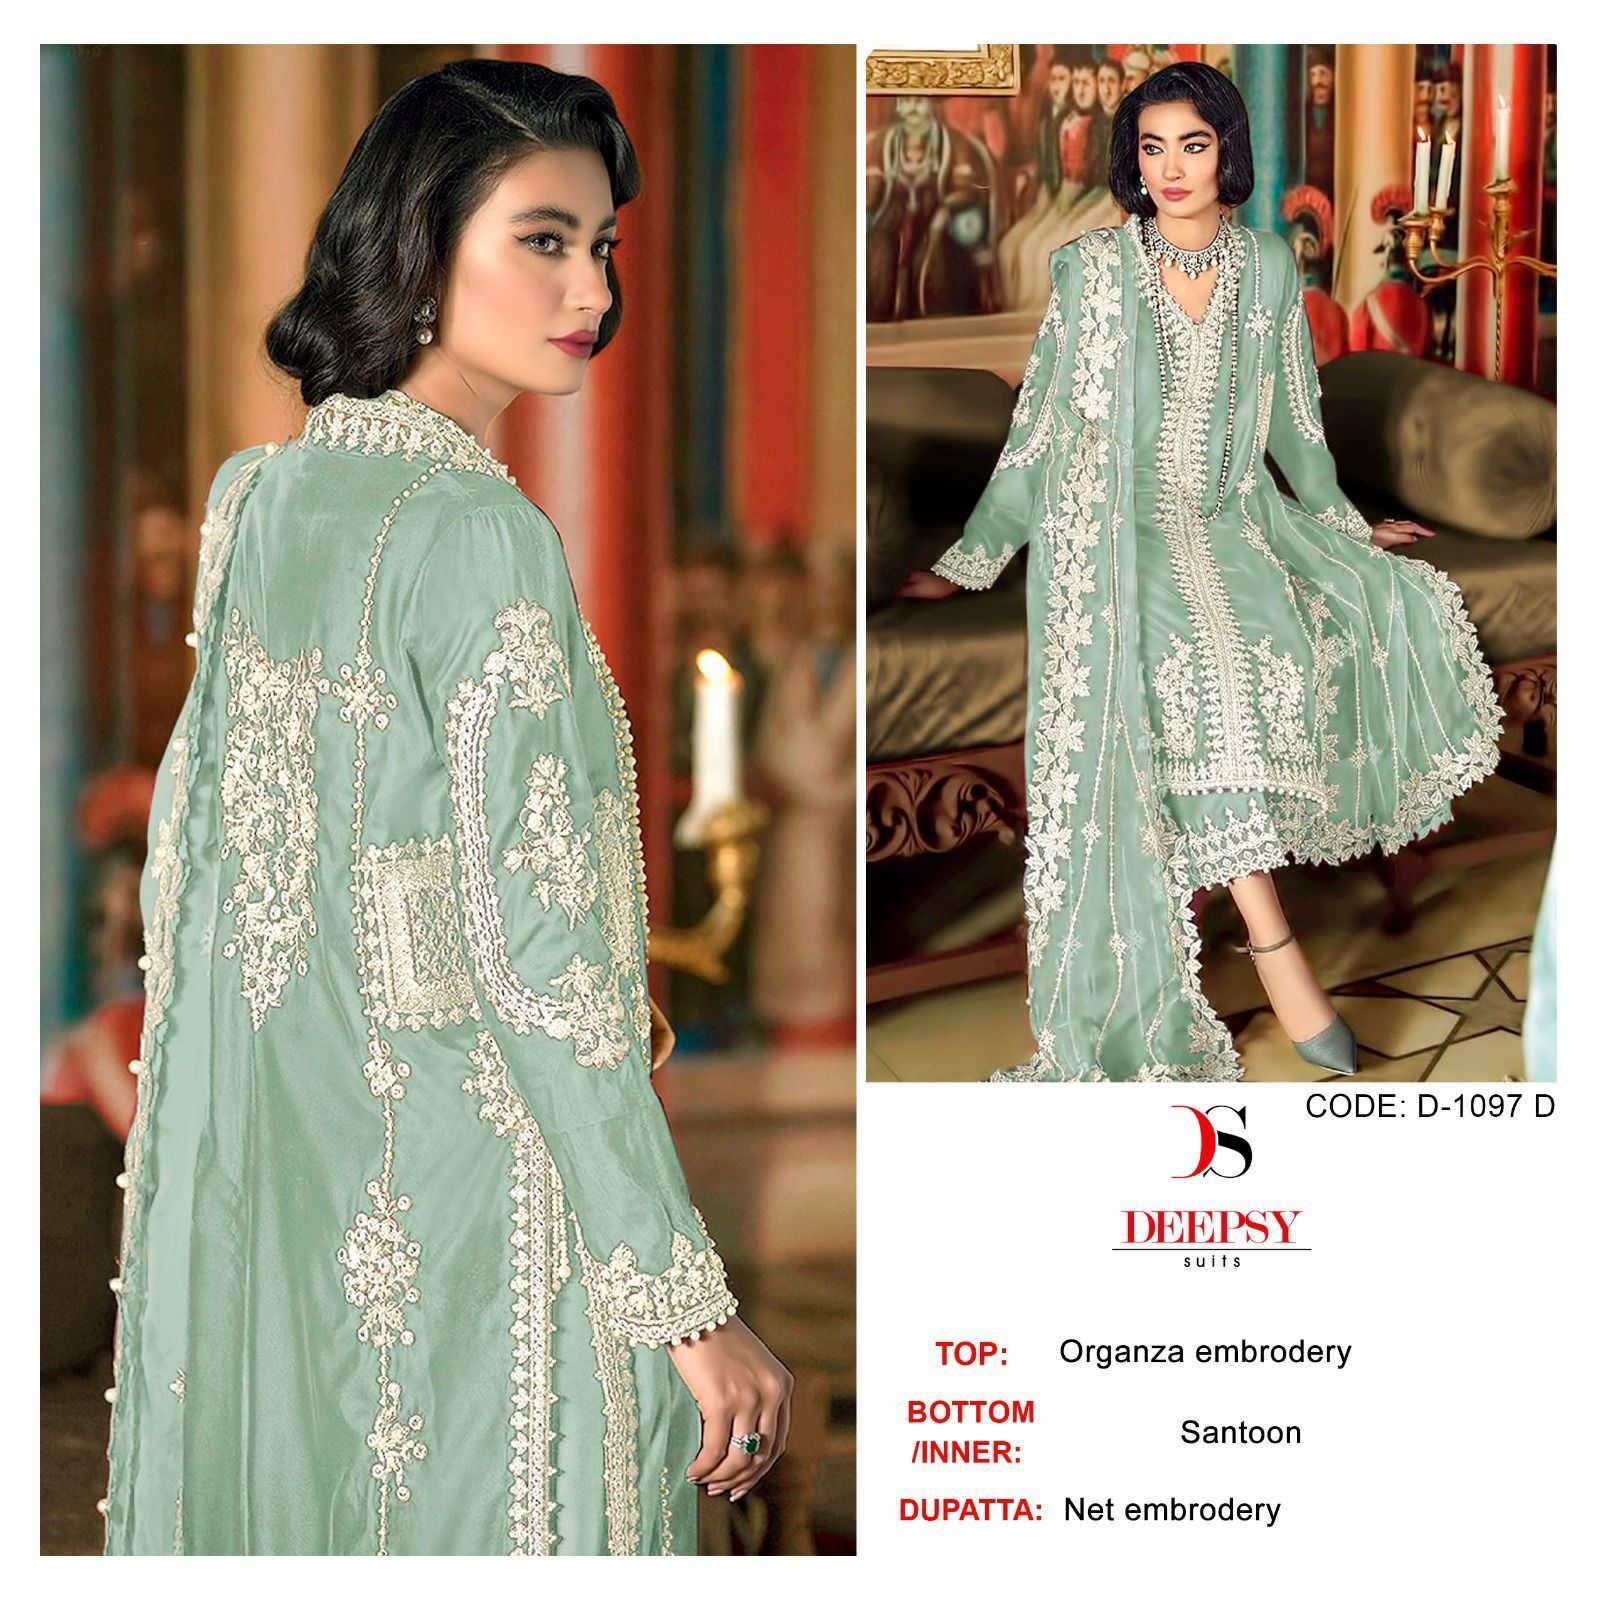 Deepsy Suits 1097 Colours Organza with EMbroidery work Pakis...